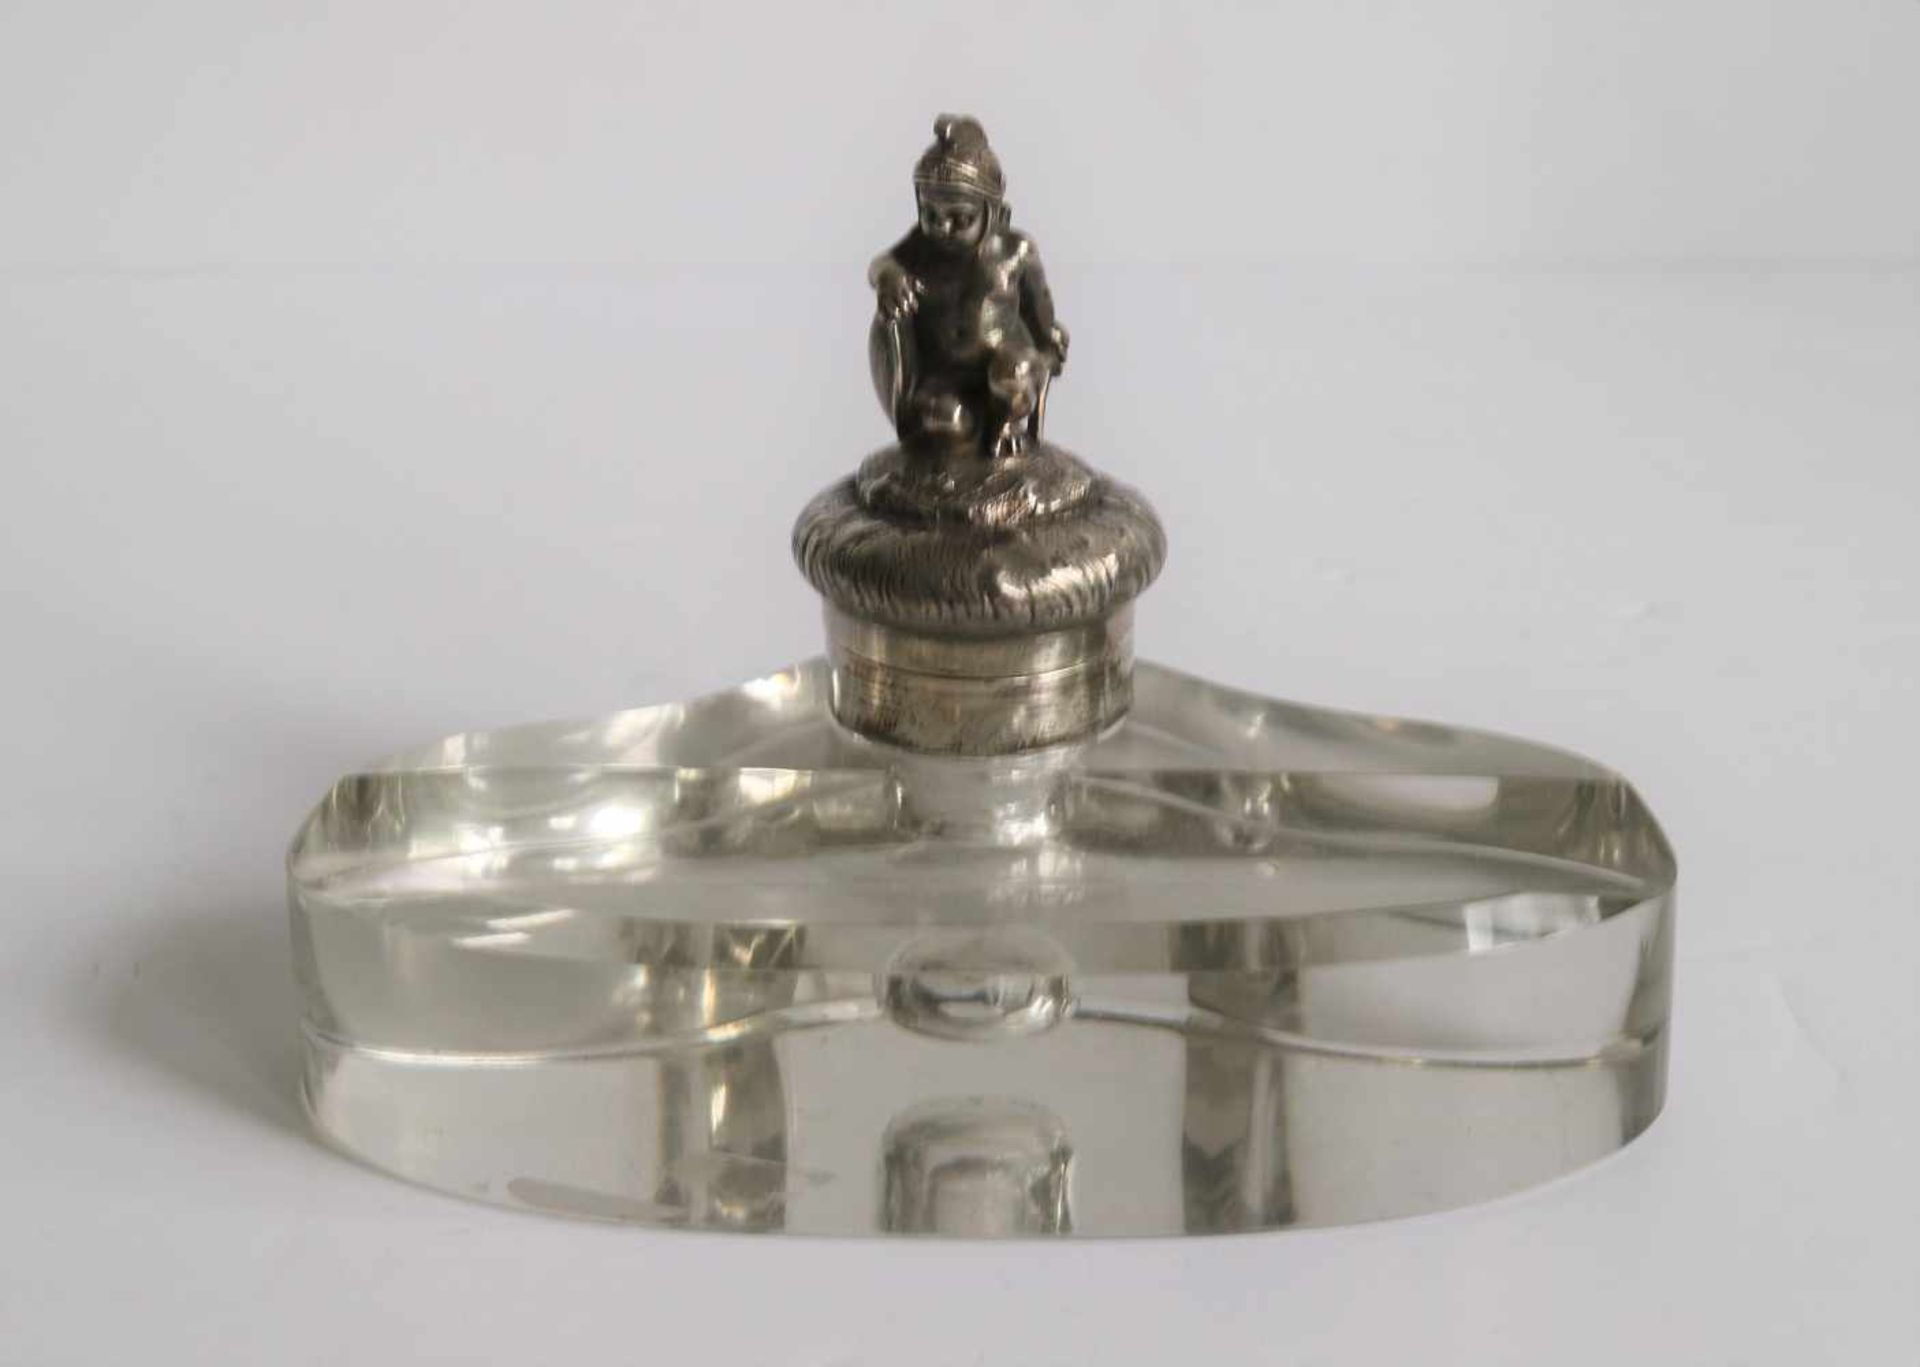 2 silver inkwells Both inkwells with mark (s), France H 9,5 en 10 cm - Image 10 of 10